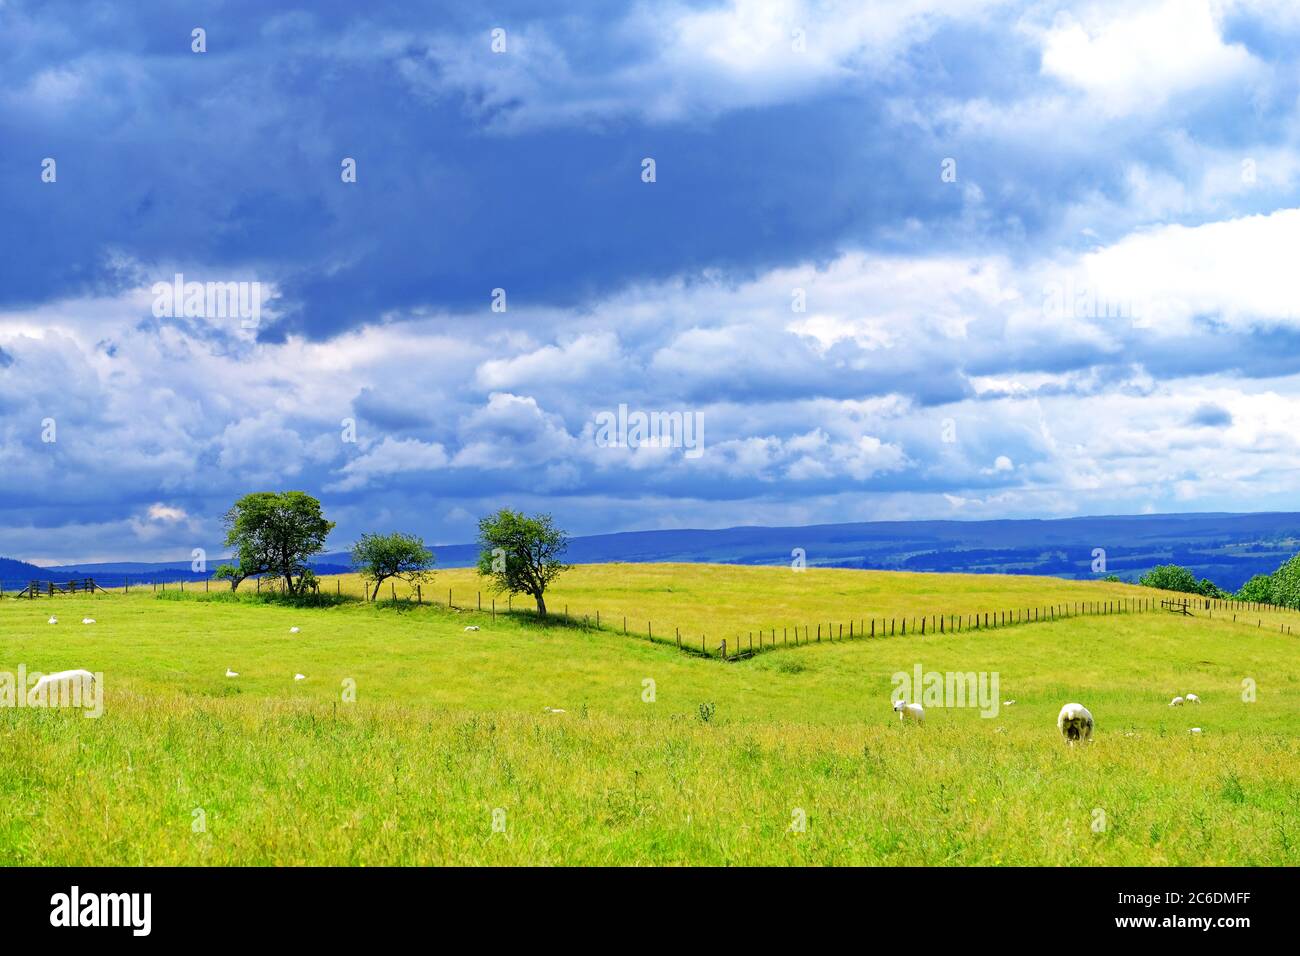 Sheep in a field with a v shaped fence and large cumulus nimbus cloud Stock Photo